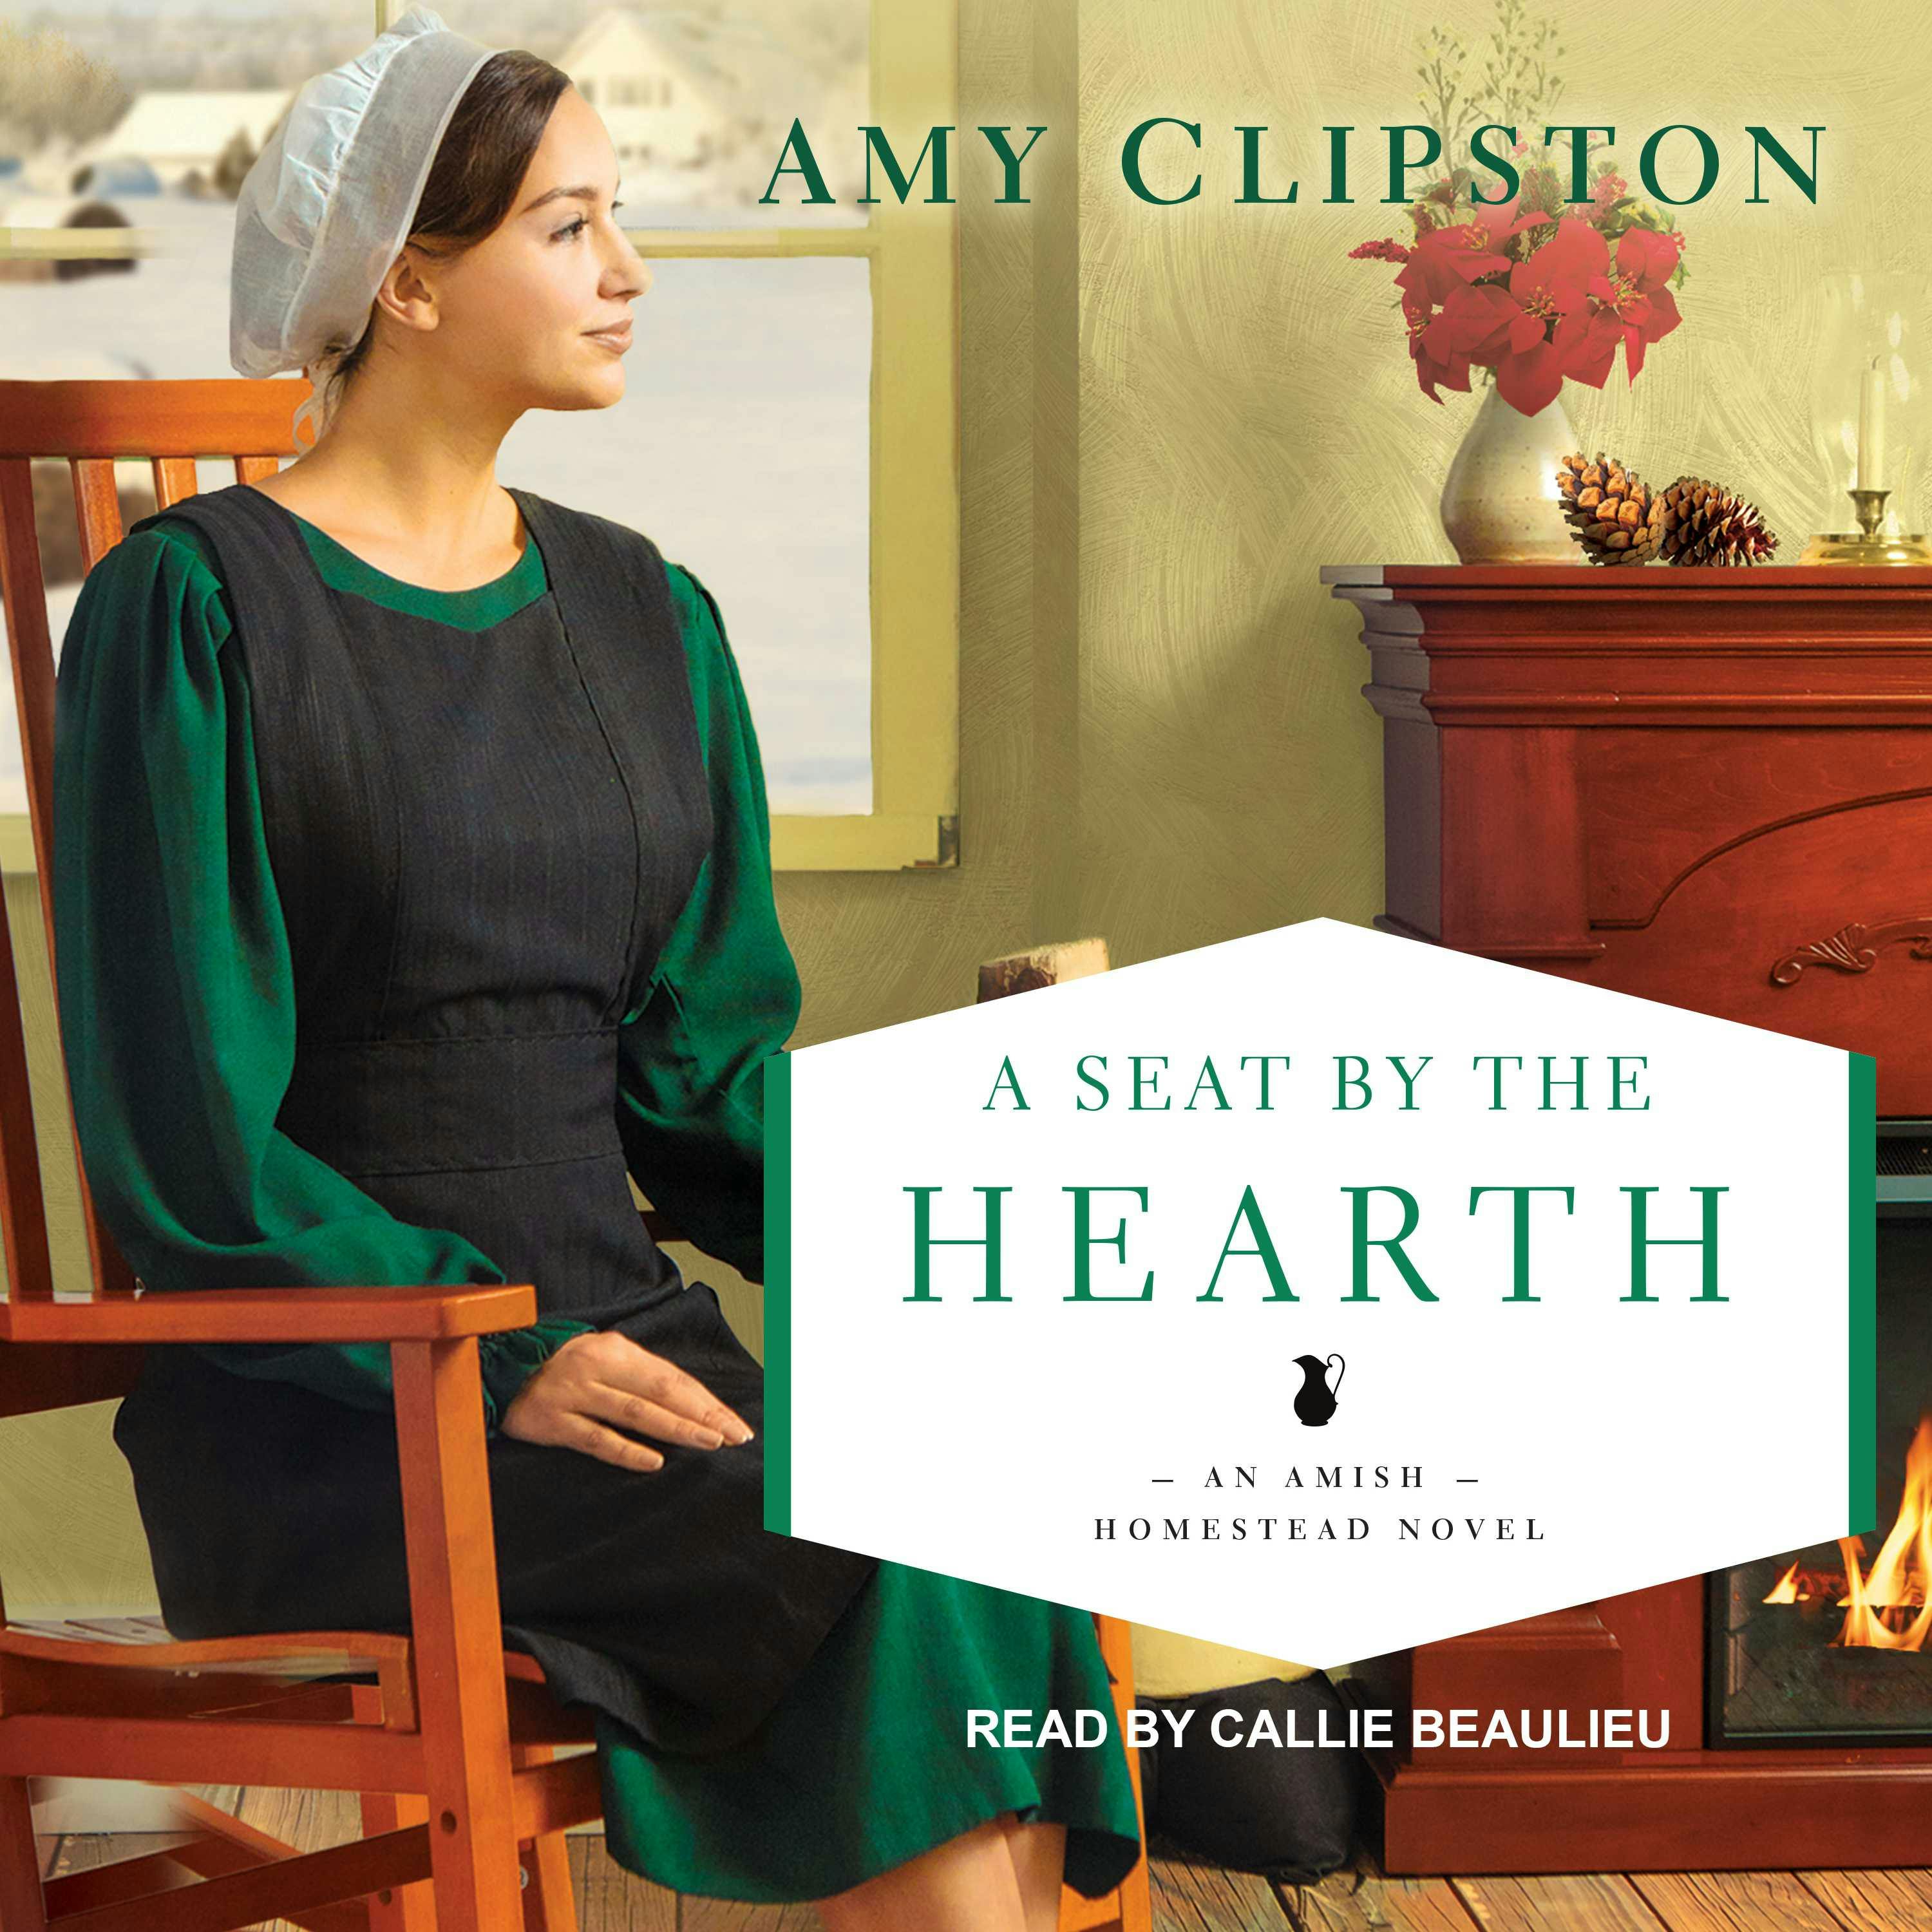 A Seat by the Hearth: An Amish Homestead Novel - Amy Clipston